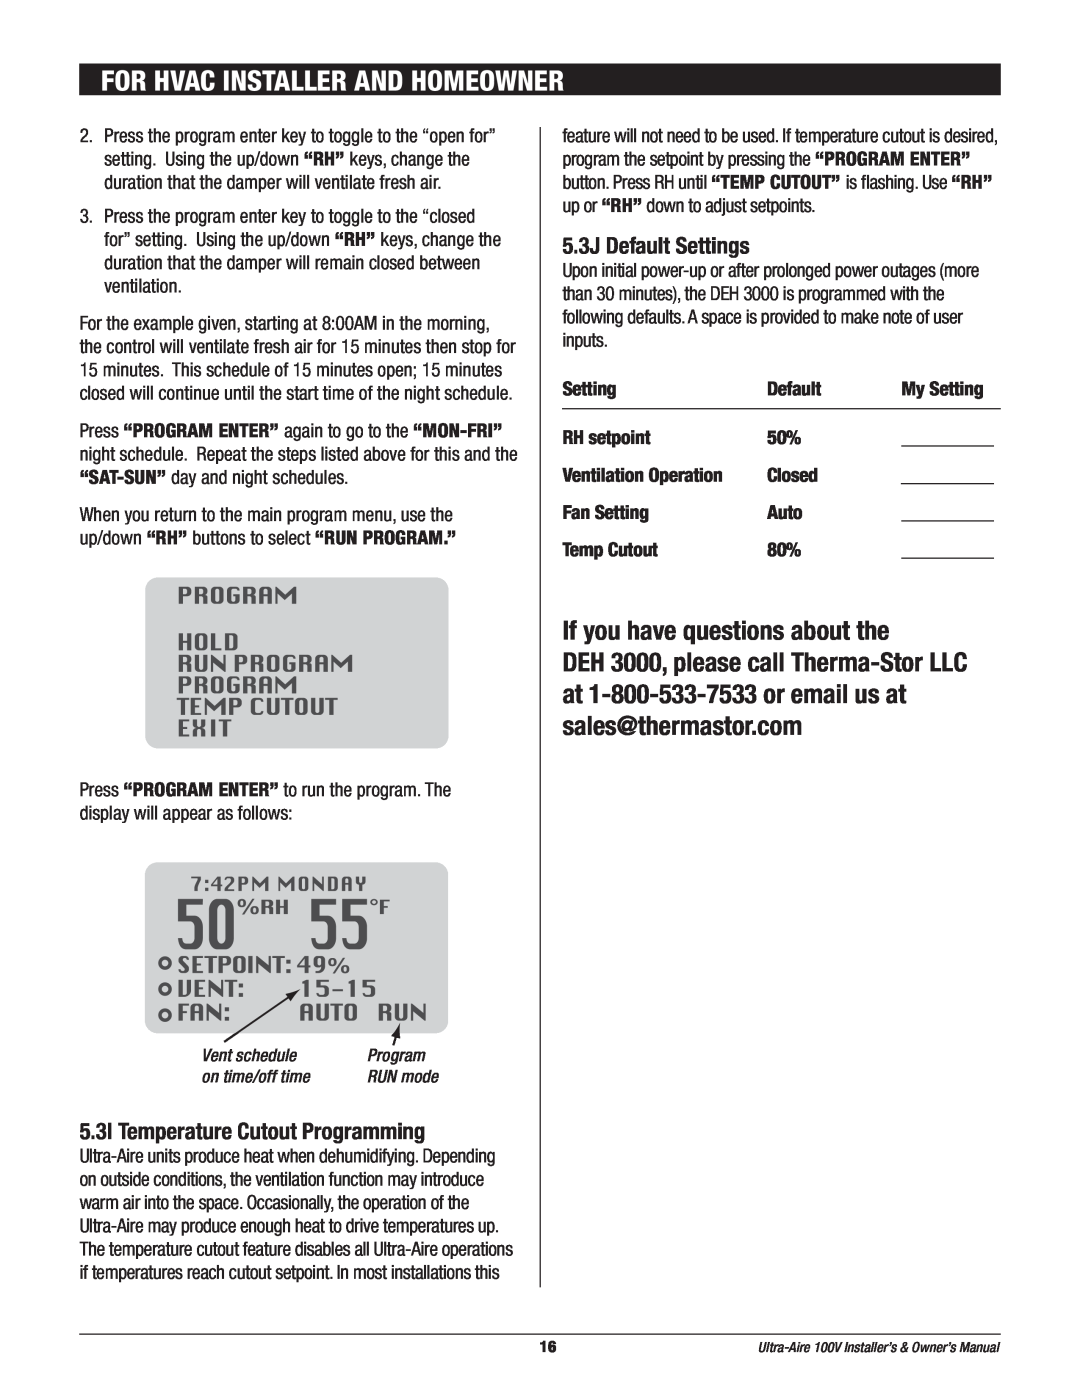 Therma-Stor Products Group Ultra-Aire 100V owner manual 5.3I Temperature Cutout Programming, 5.3J Default Settings 